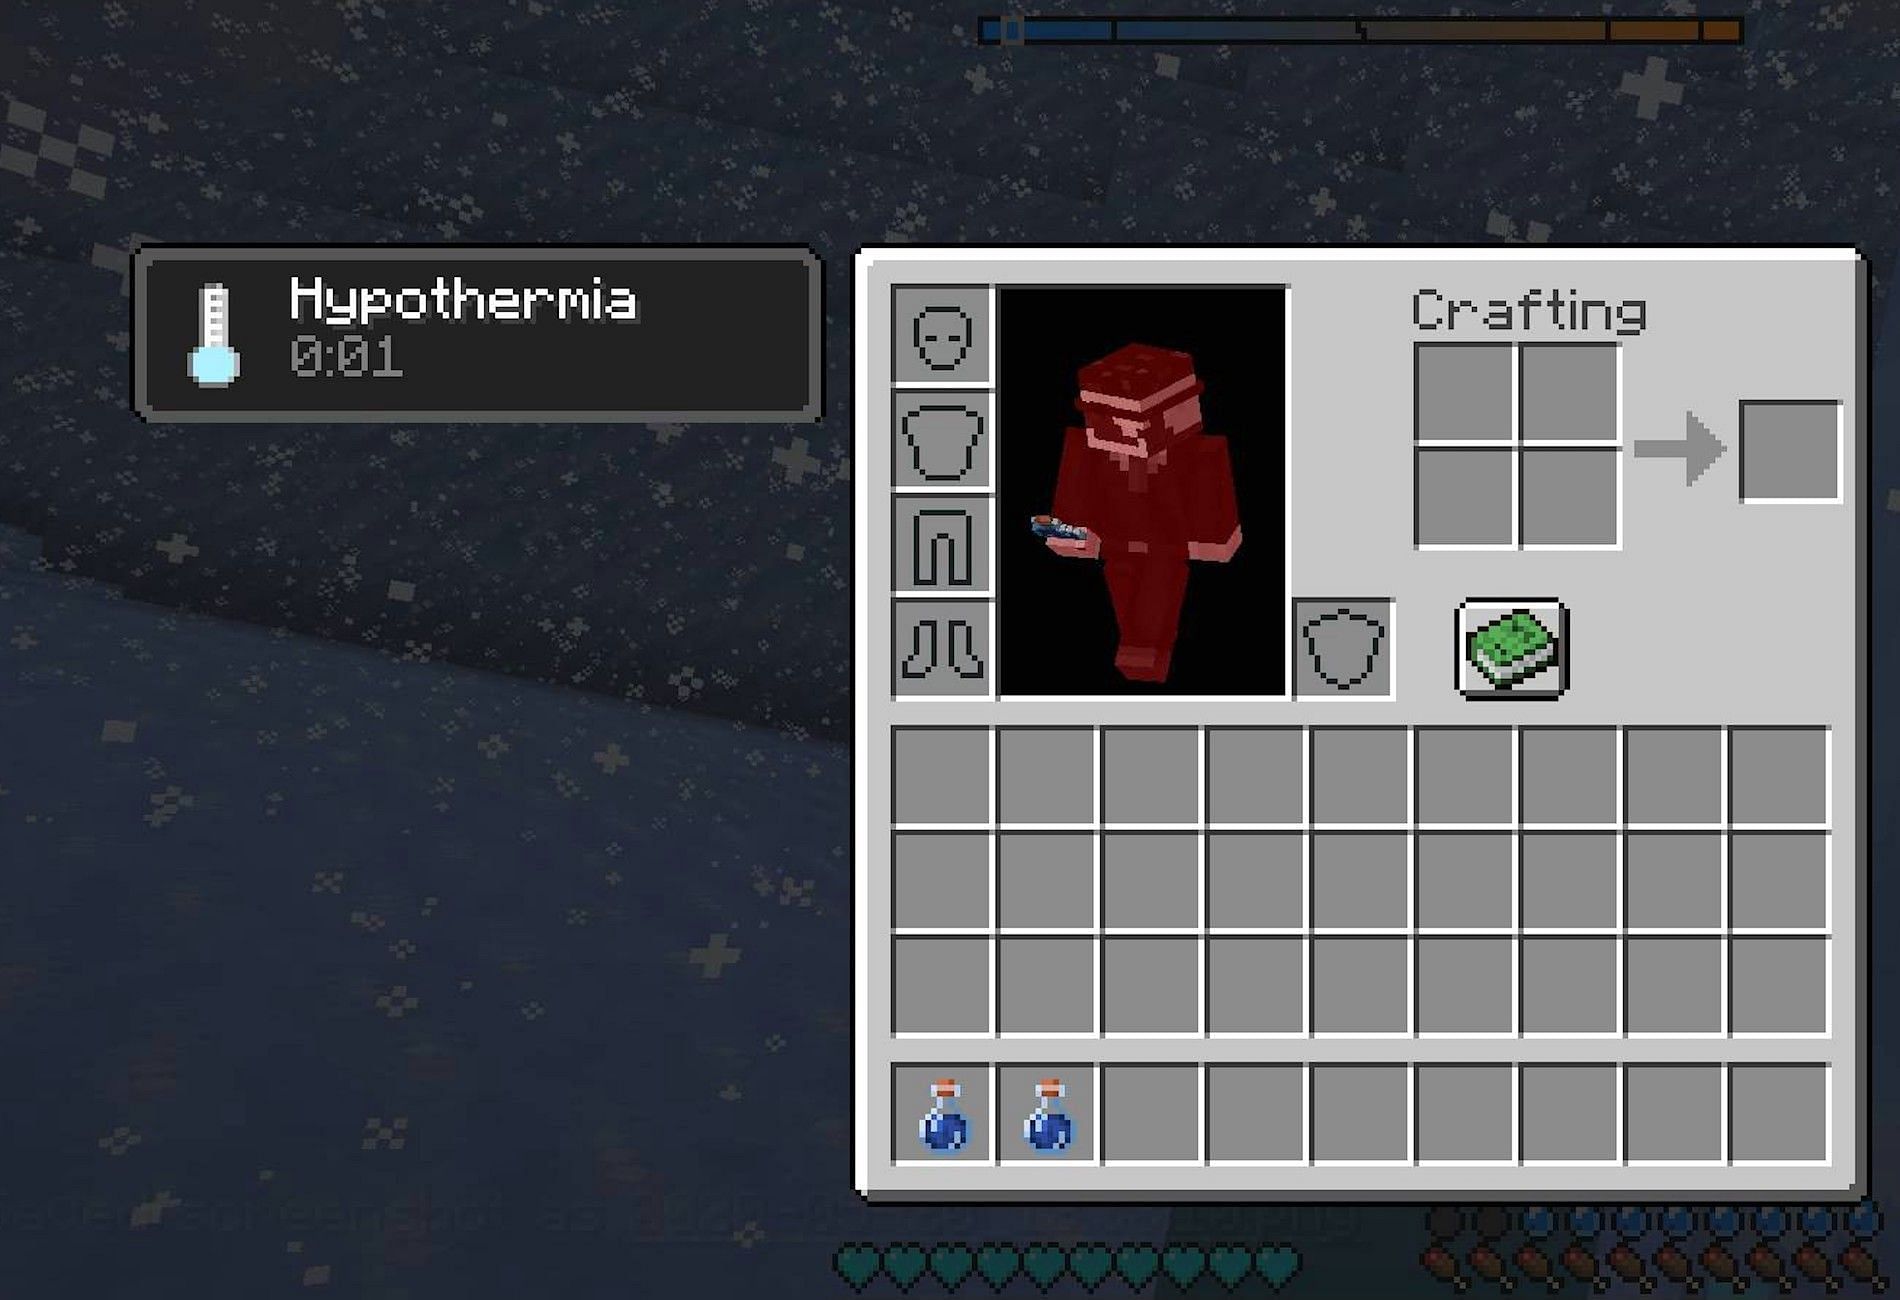 Player with hypothermia [Image via Minecraft]